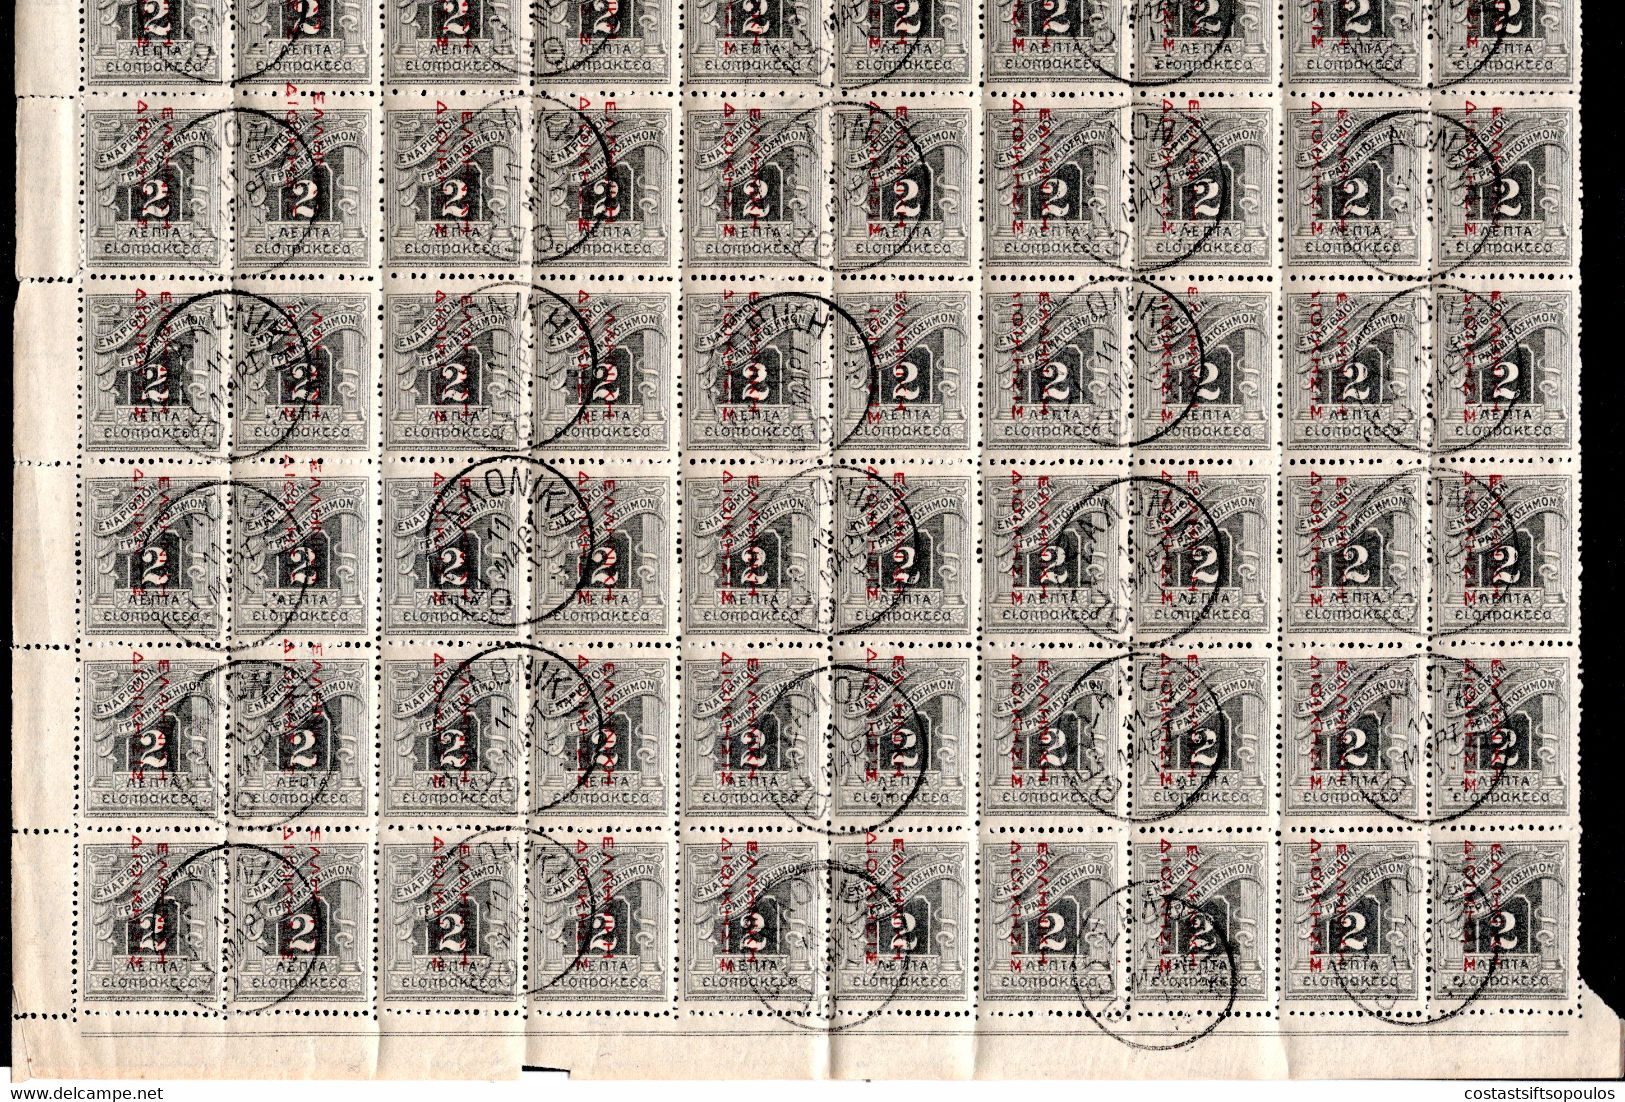 301.GREECE.1912 HELLAS D76 AND VARIETIES,HELLENIC ADM.2L.SHEET OF 100 C.T.O. SALONIQUE,CATALOGUE VALUE OVER EURO 1000 - Usados